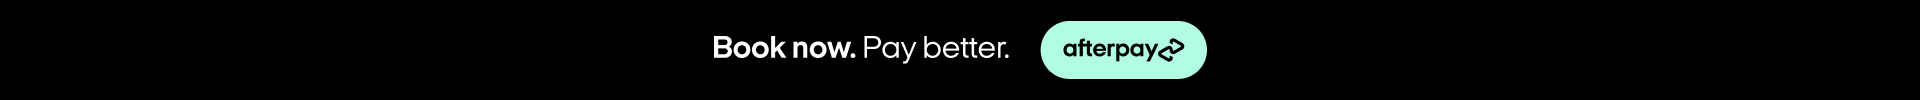 Afterpay logo in black